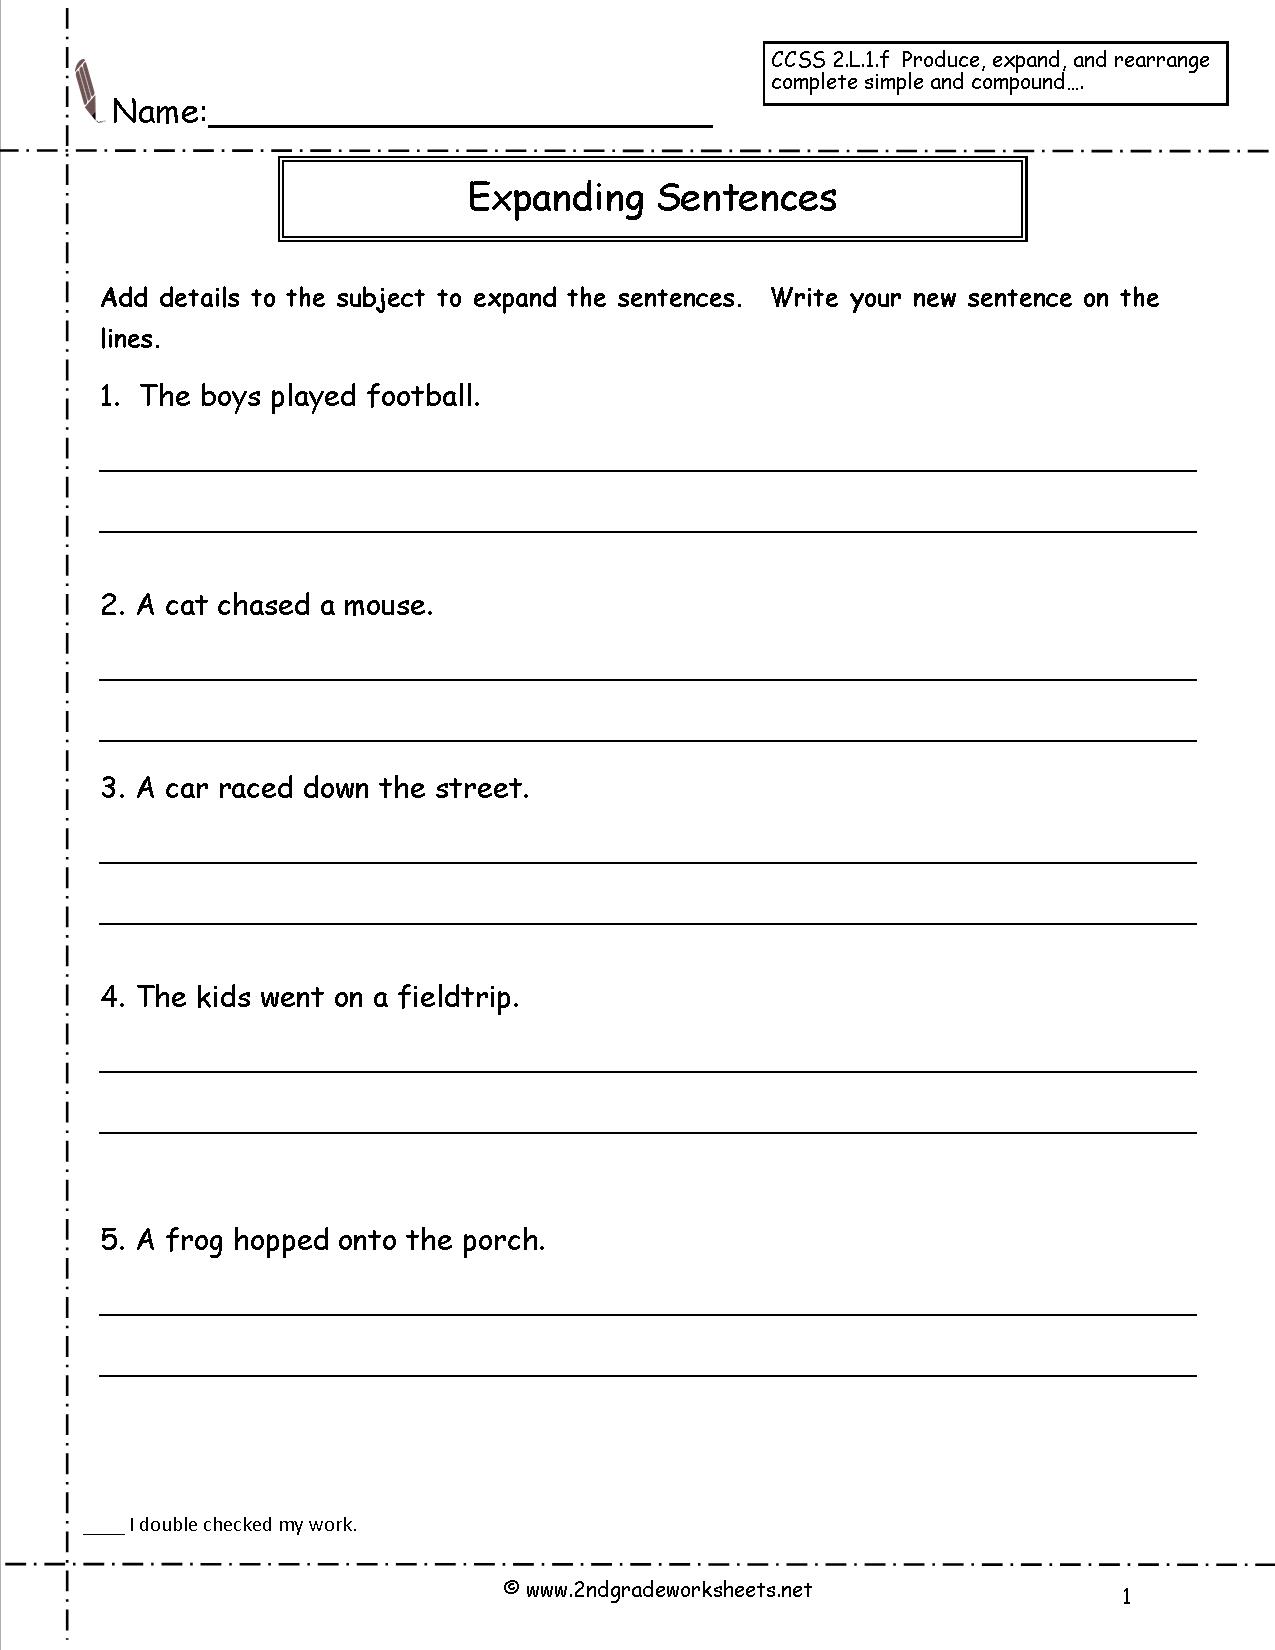 adjectives-and-adverbs-worksheet-primary-exercises